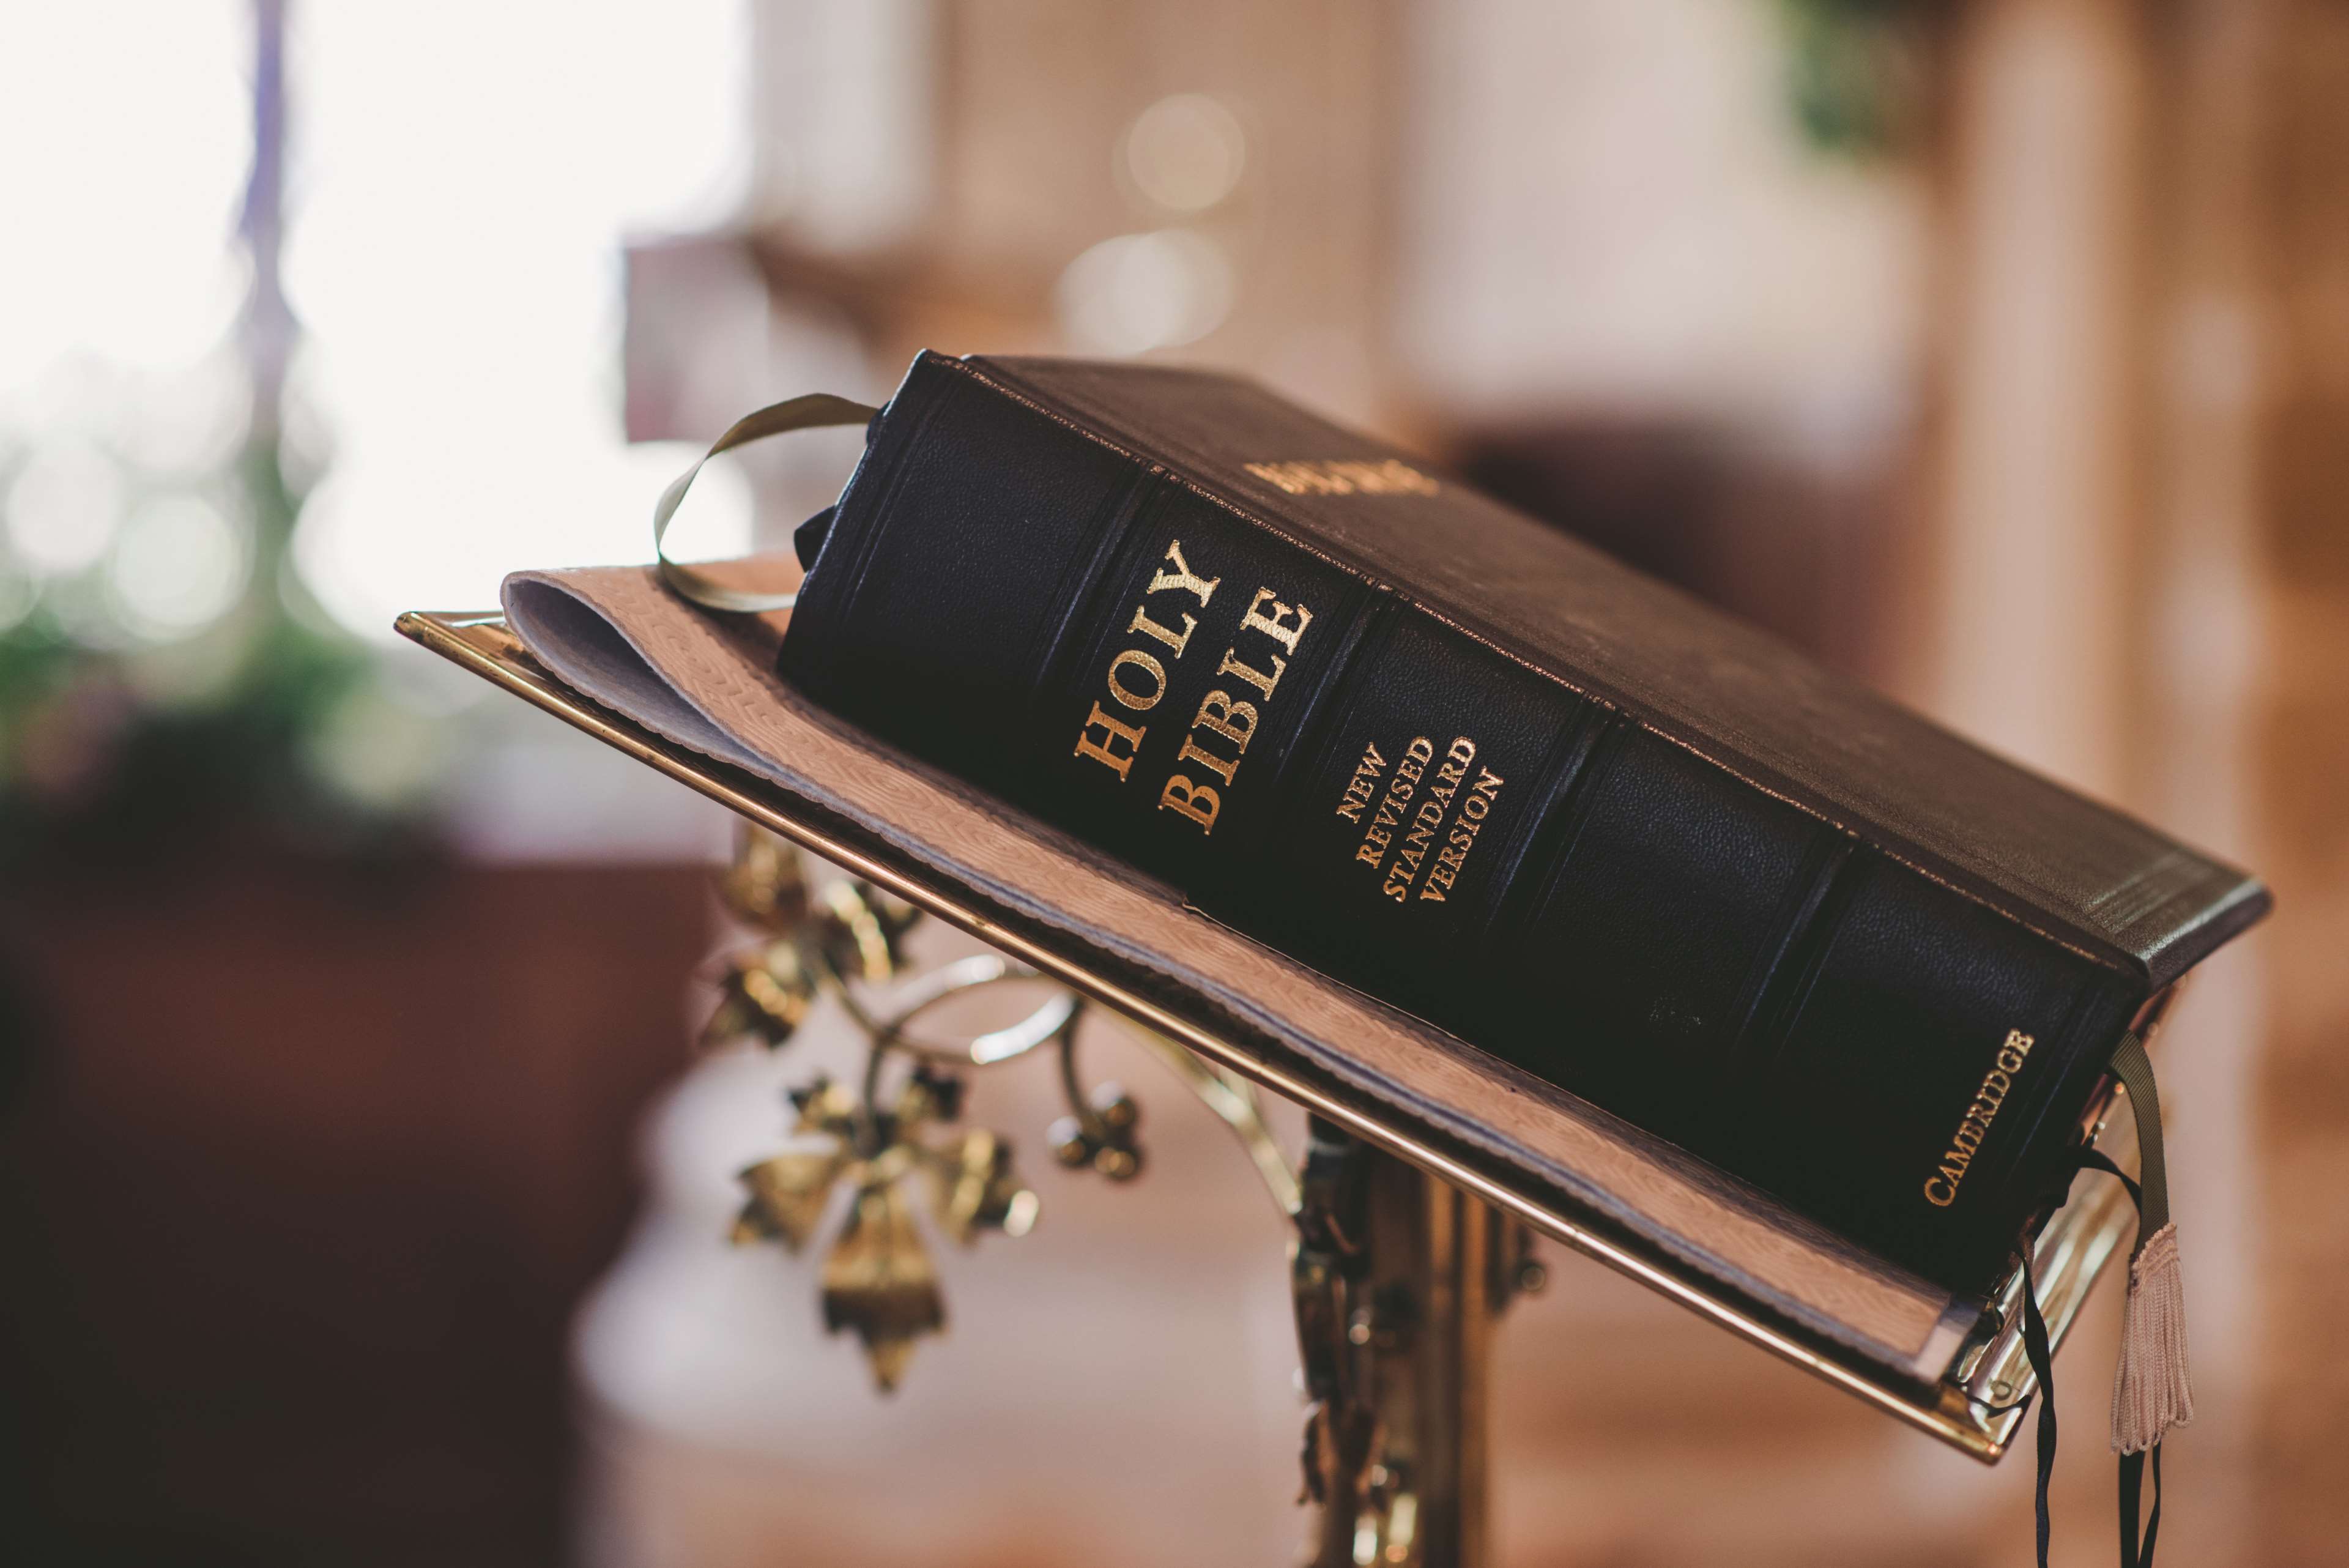 holy book 1080P, 2k, 4k HD wallpaper, background free download